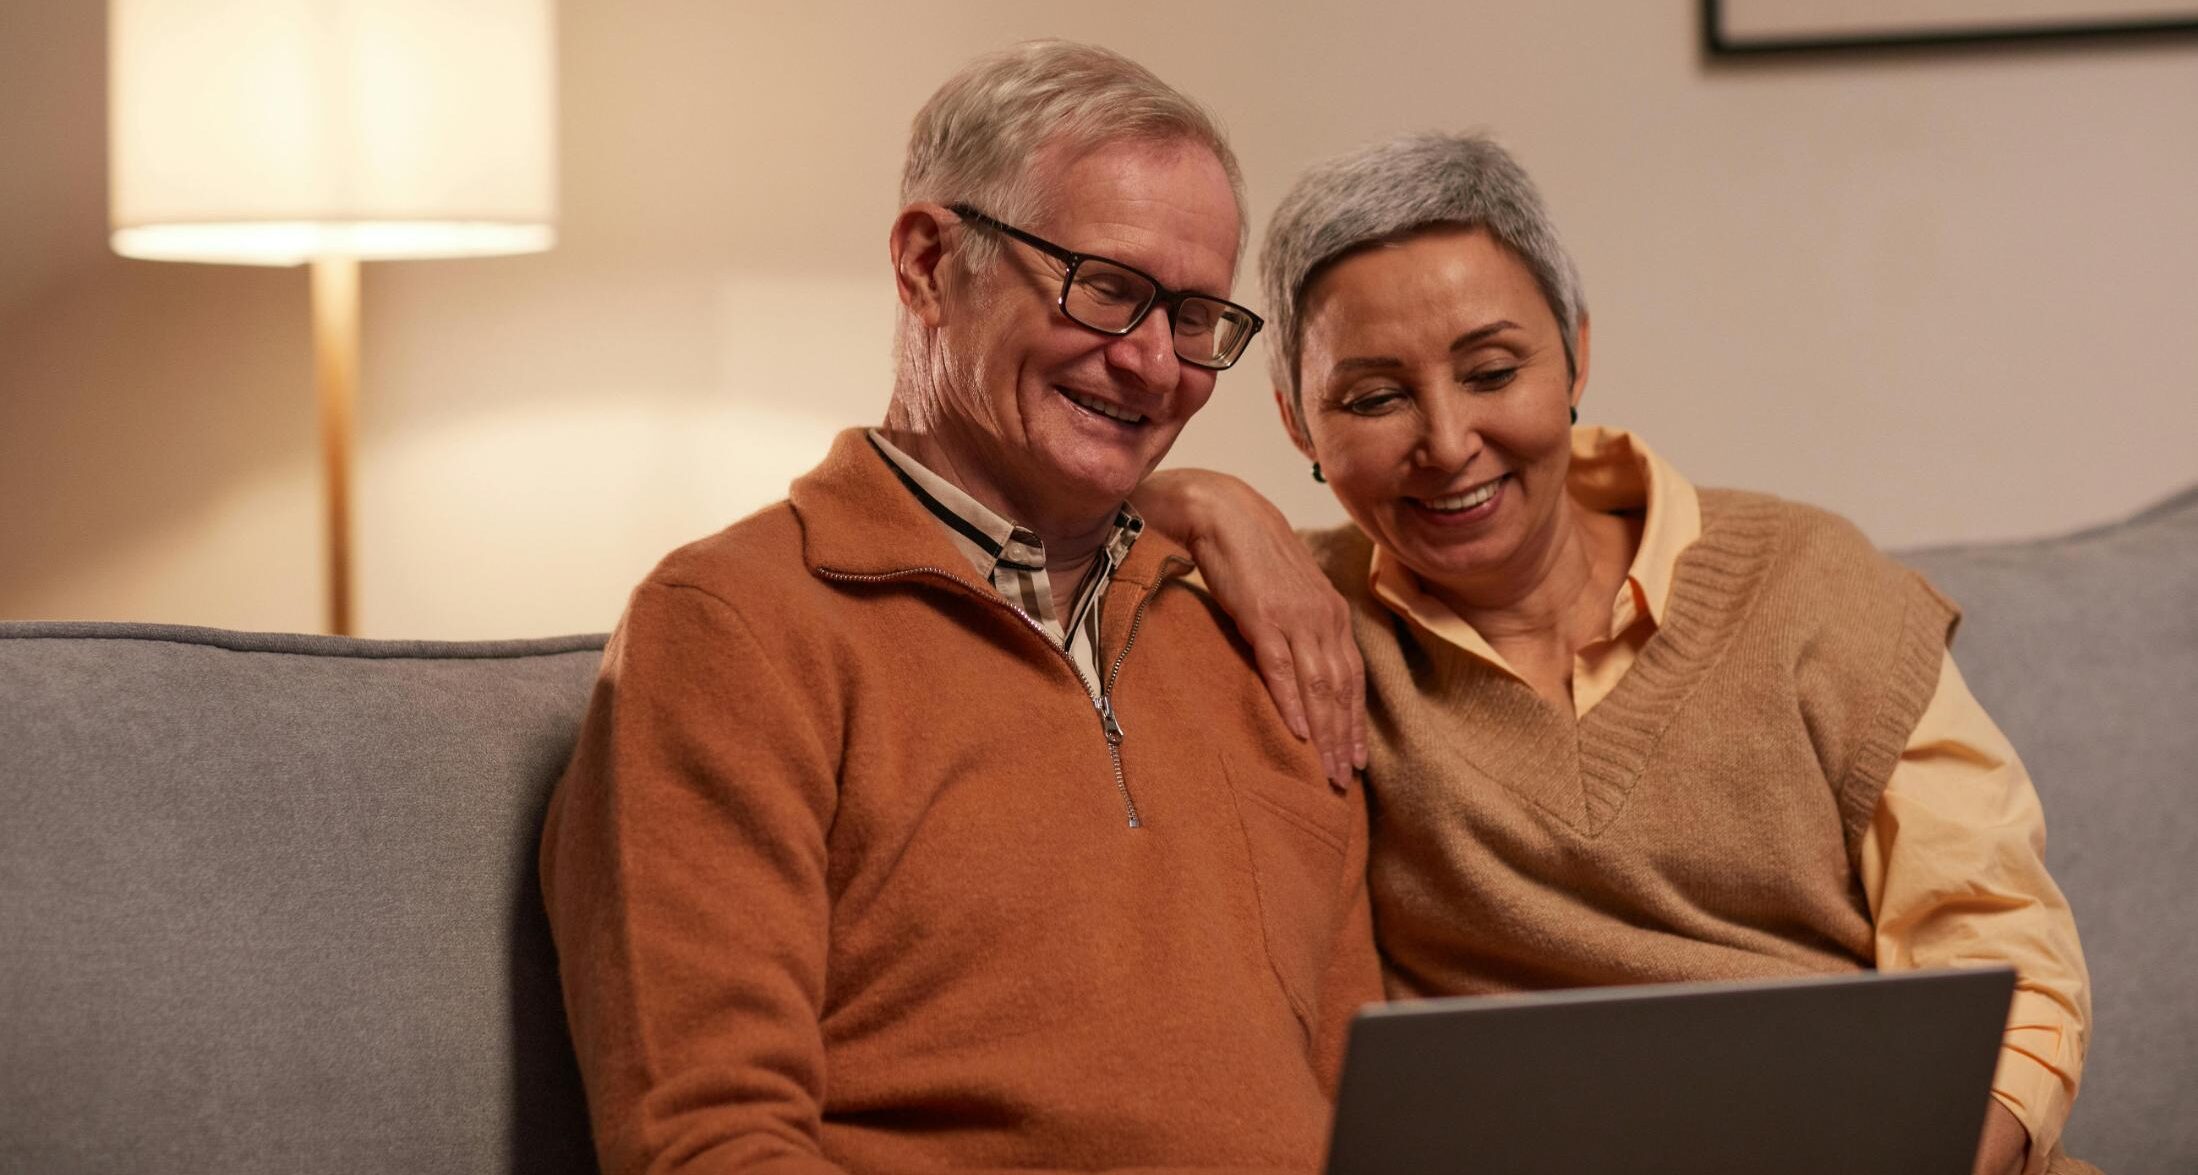 two older couple cuddled on a couch smiling at a laptop